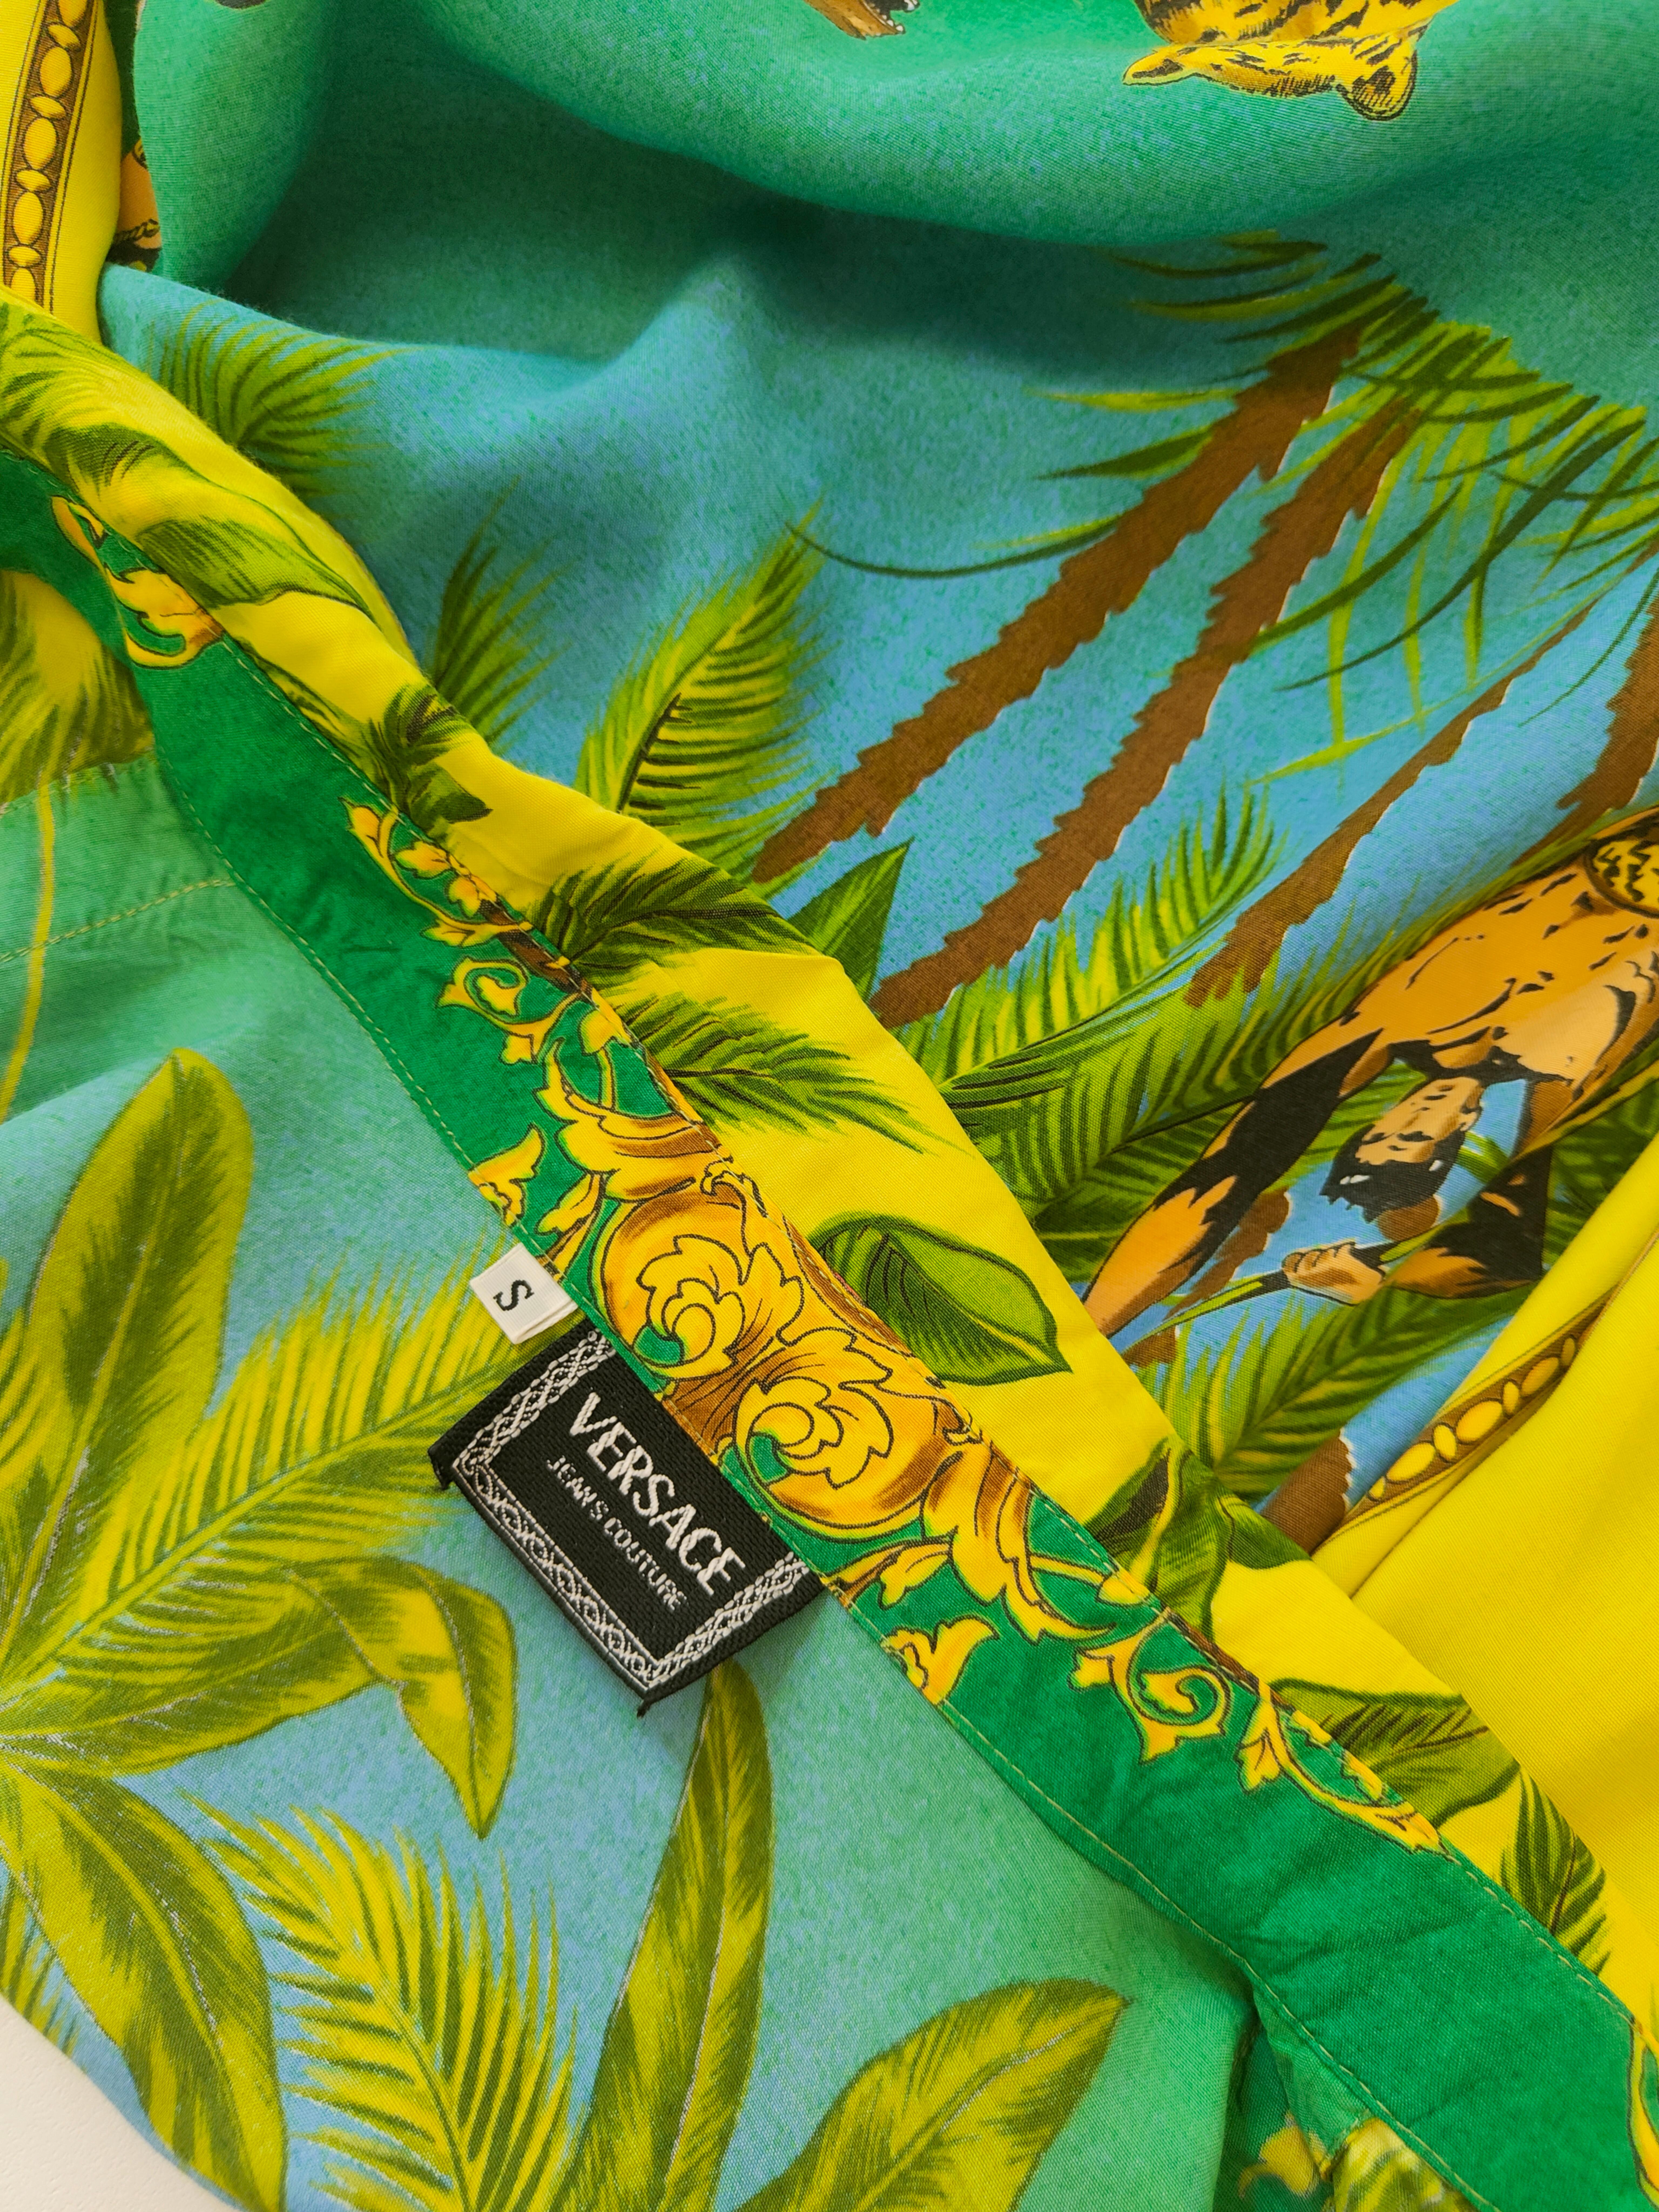 Versace iconic cotton Tarzan shirt
One of a kind multicoloured cotton shirt
Totally made in Italy in size S